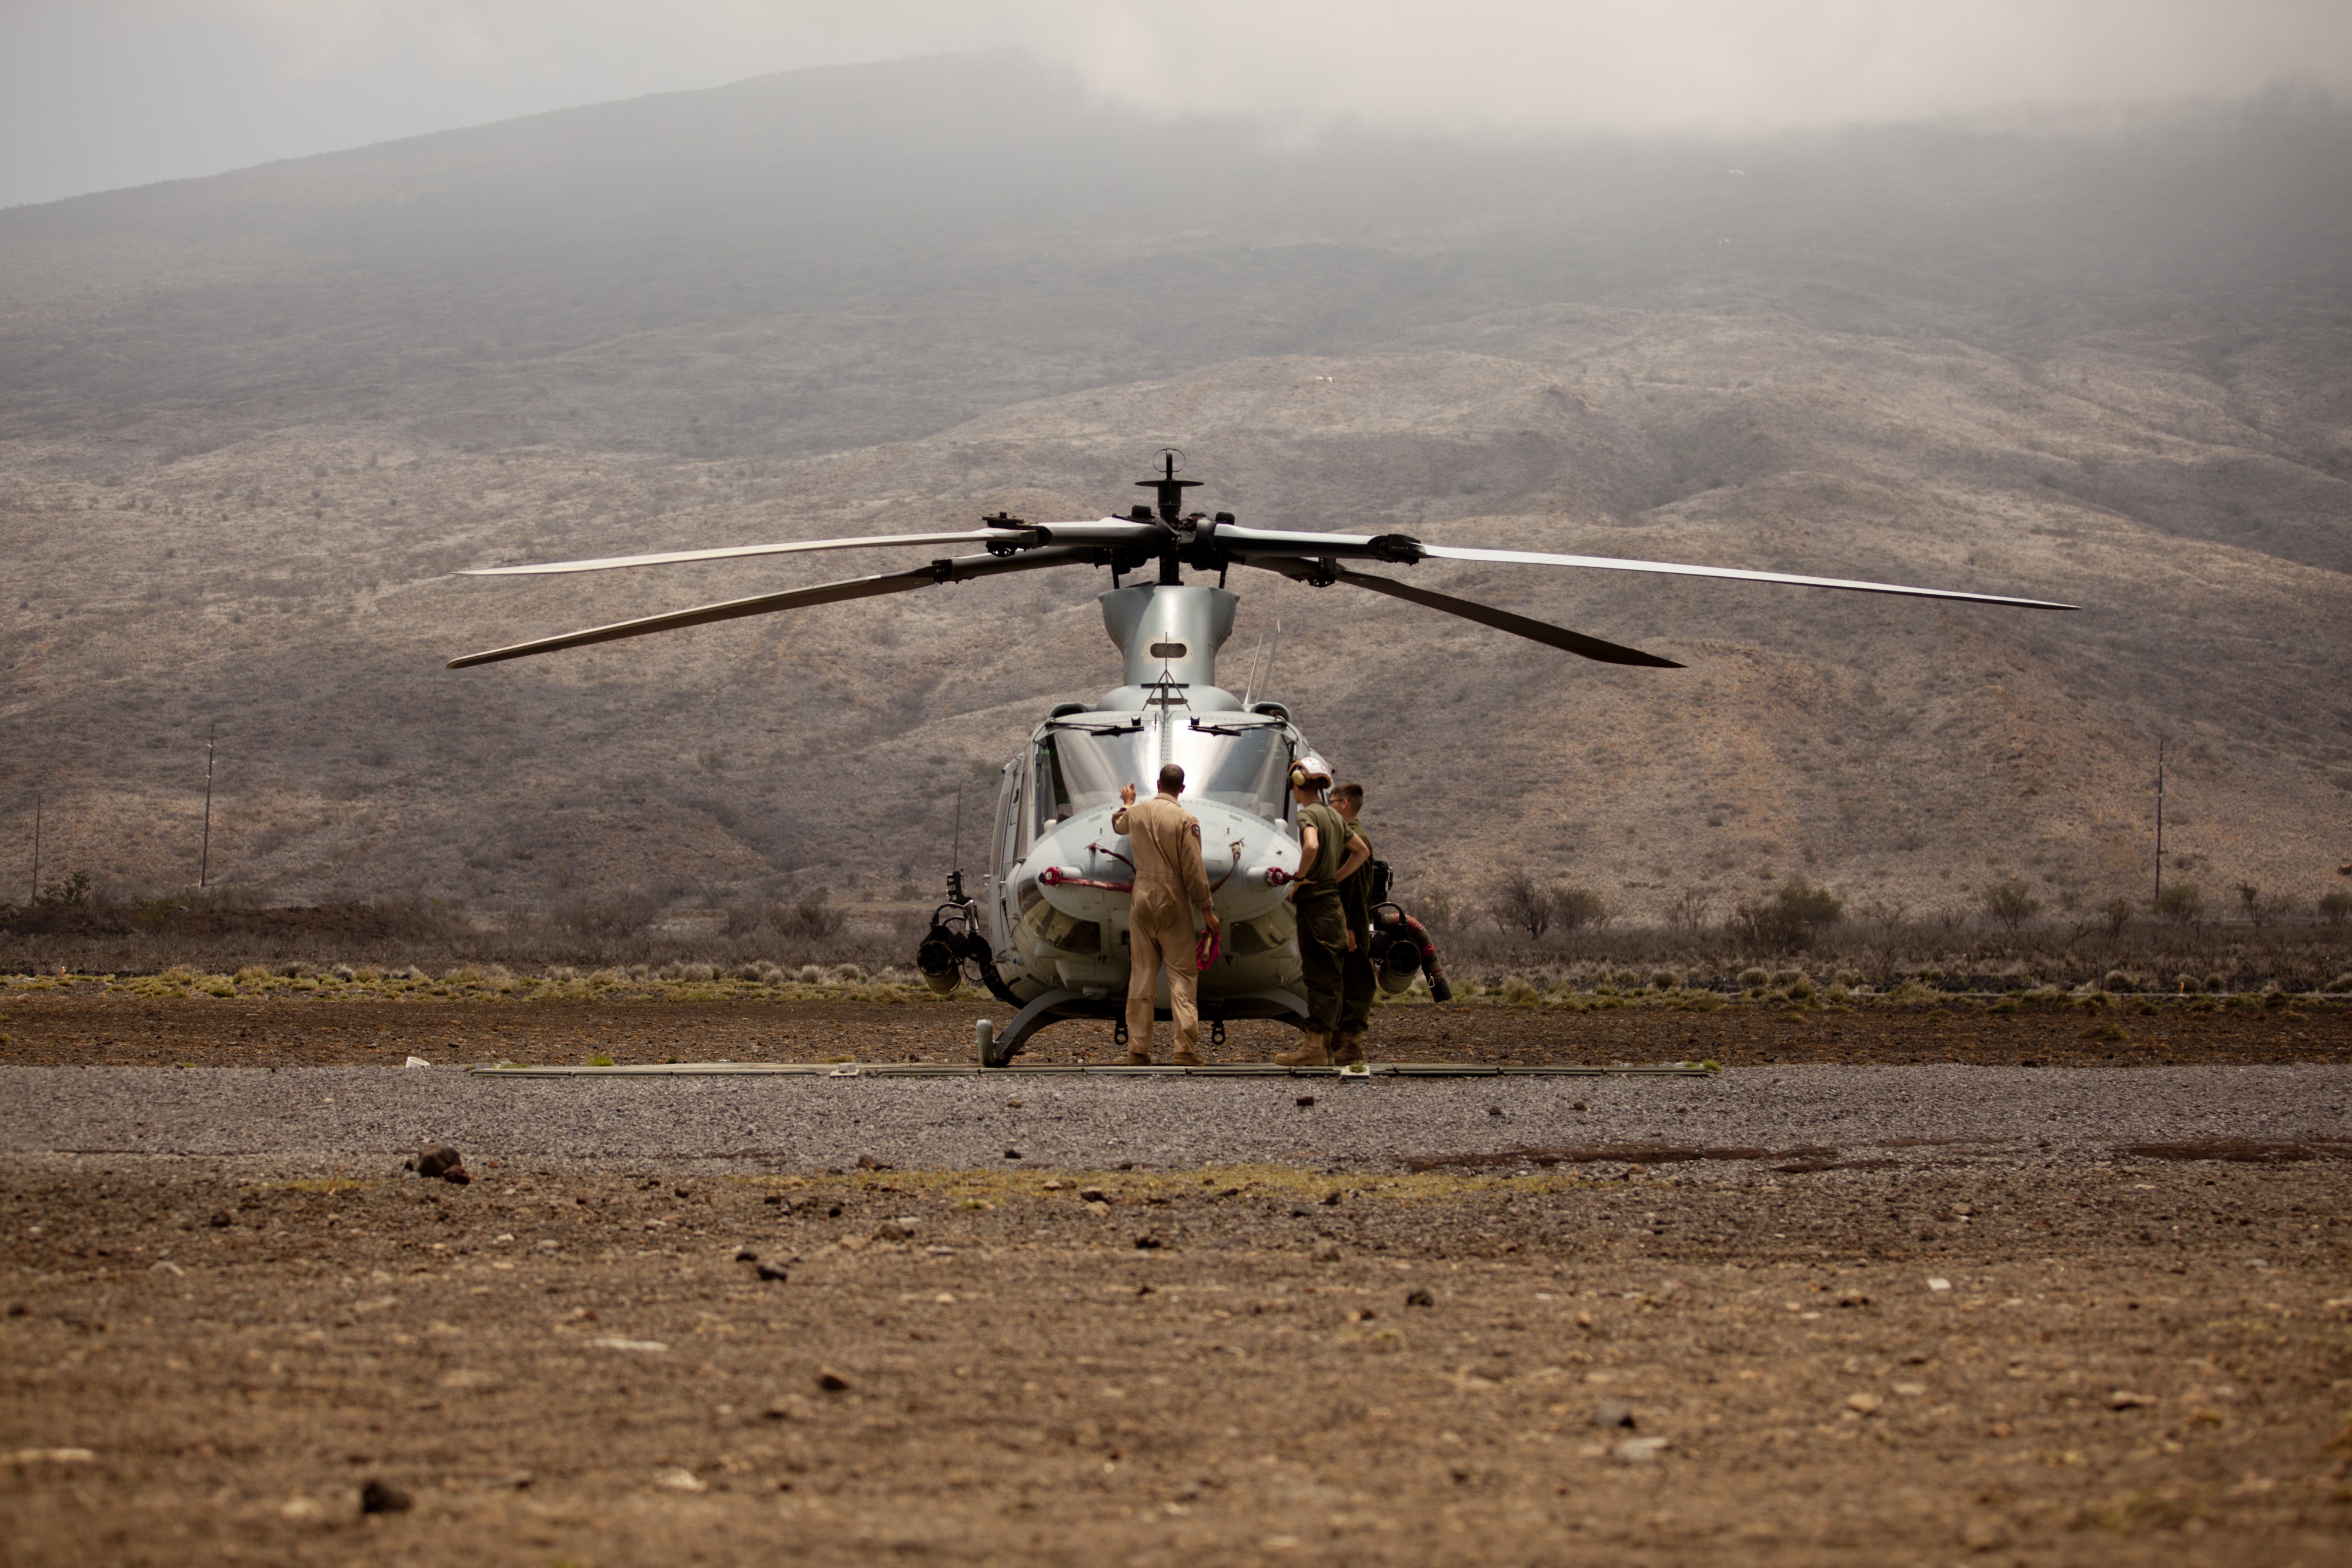 U.S. Marines with Marine Light Attack Helicopter Squadron 367 (HMLA-367) conducts maintenance inspections on a UH-1Y helicopter at Pohakuloa Training Area (PTA), Hawaii, May 10, 2013 130510-M-SD704-054